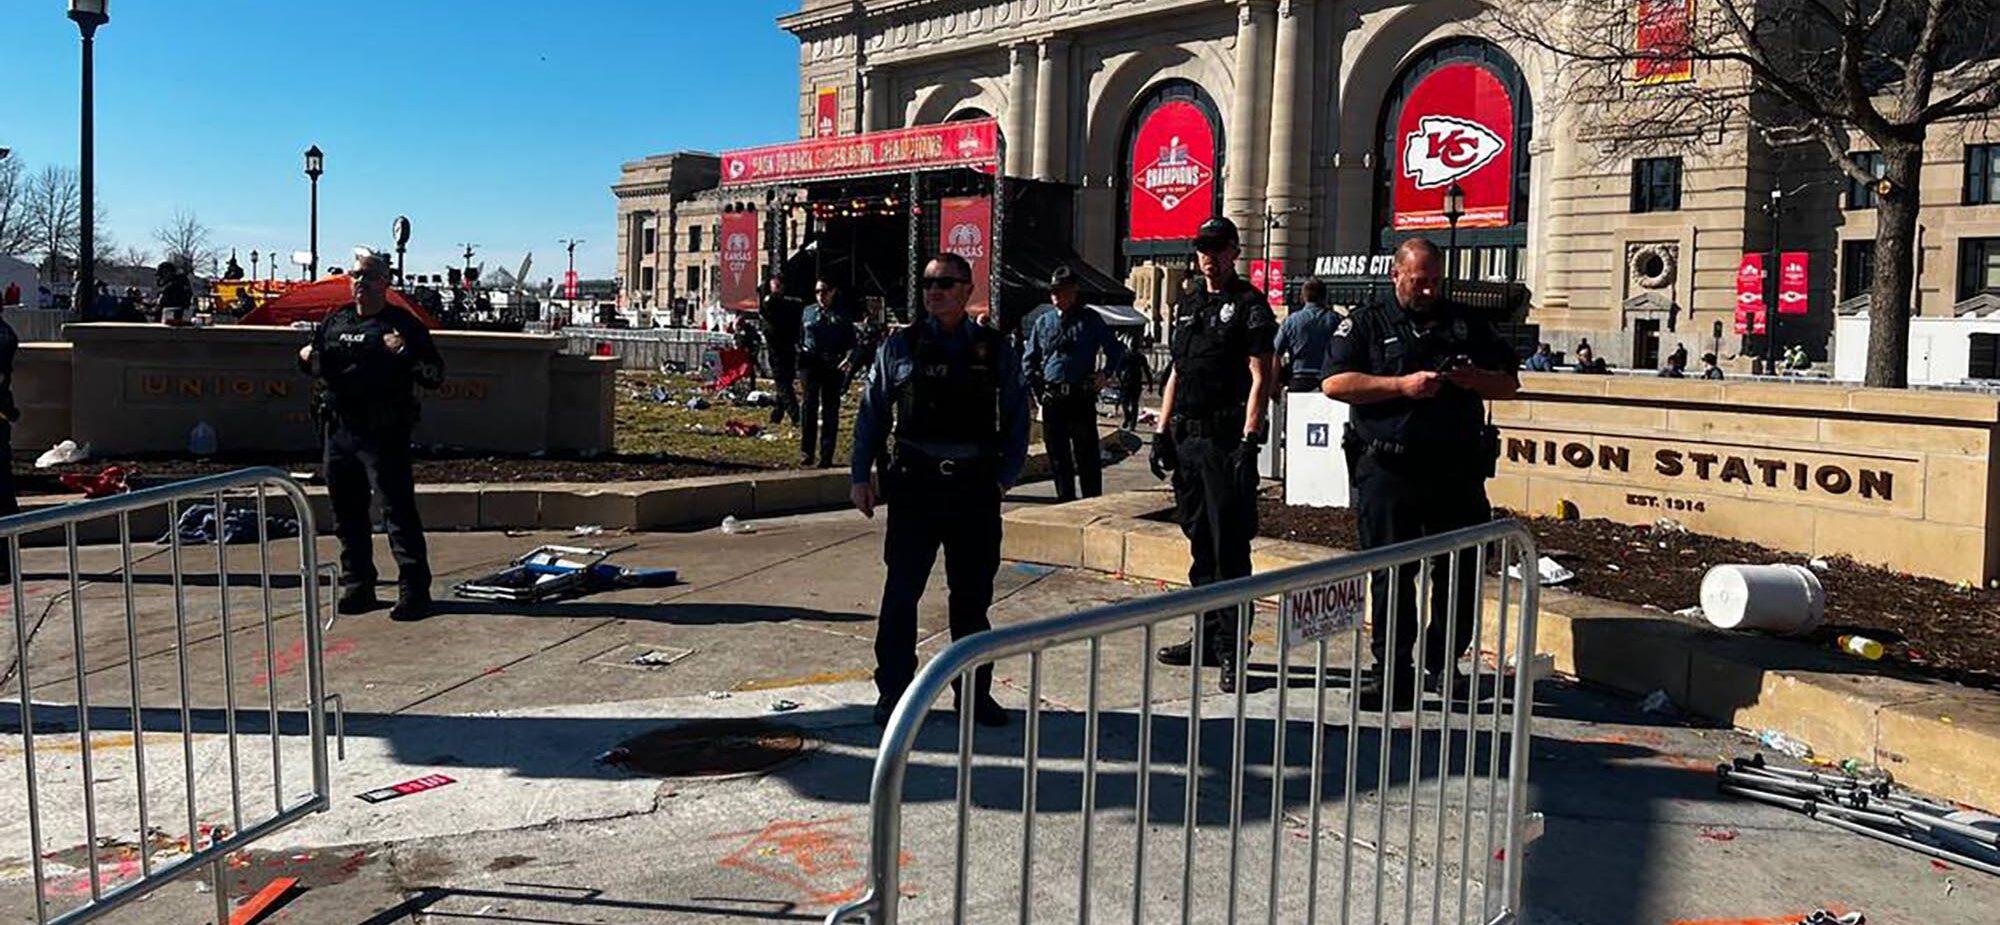 Police officers investigate the scene of a shooting where at least one person was killed and more than 20 others were injured after the Kansas City Chiefs Super Bowl LVIII victory parade